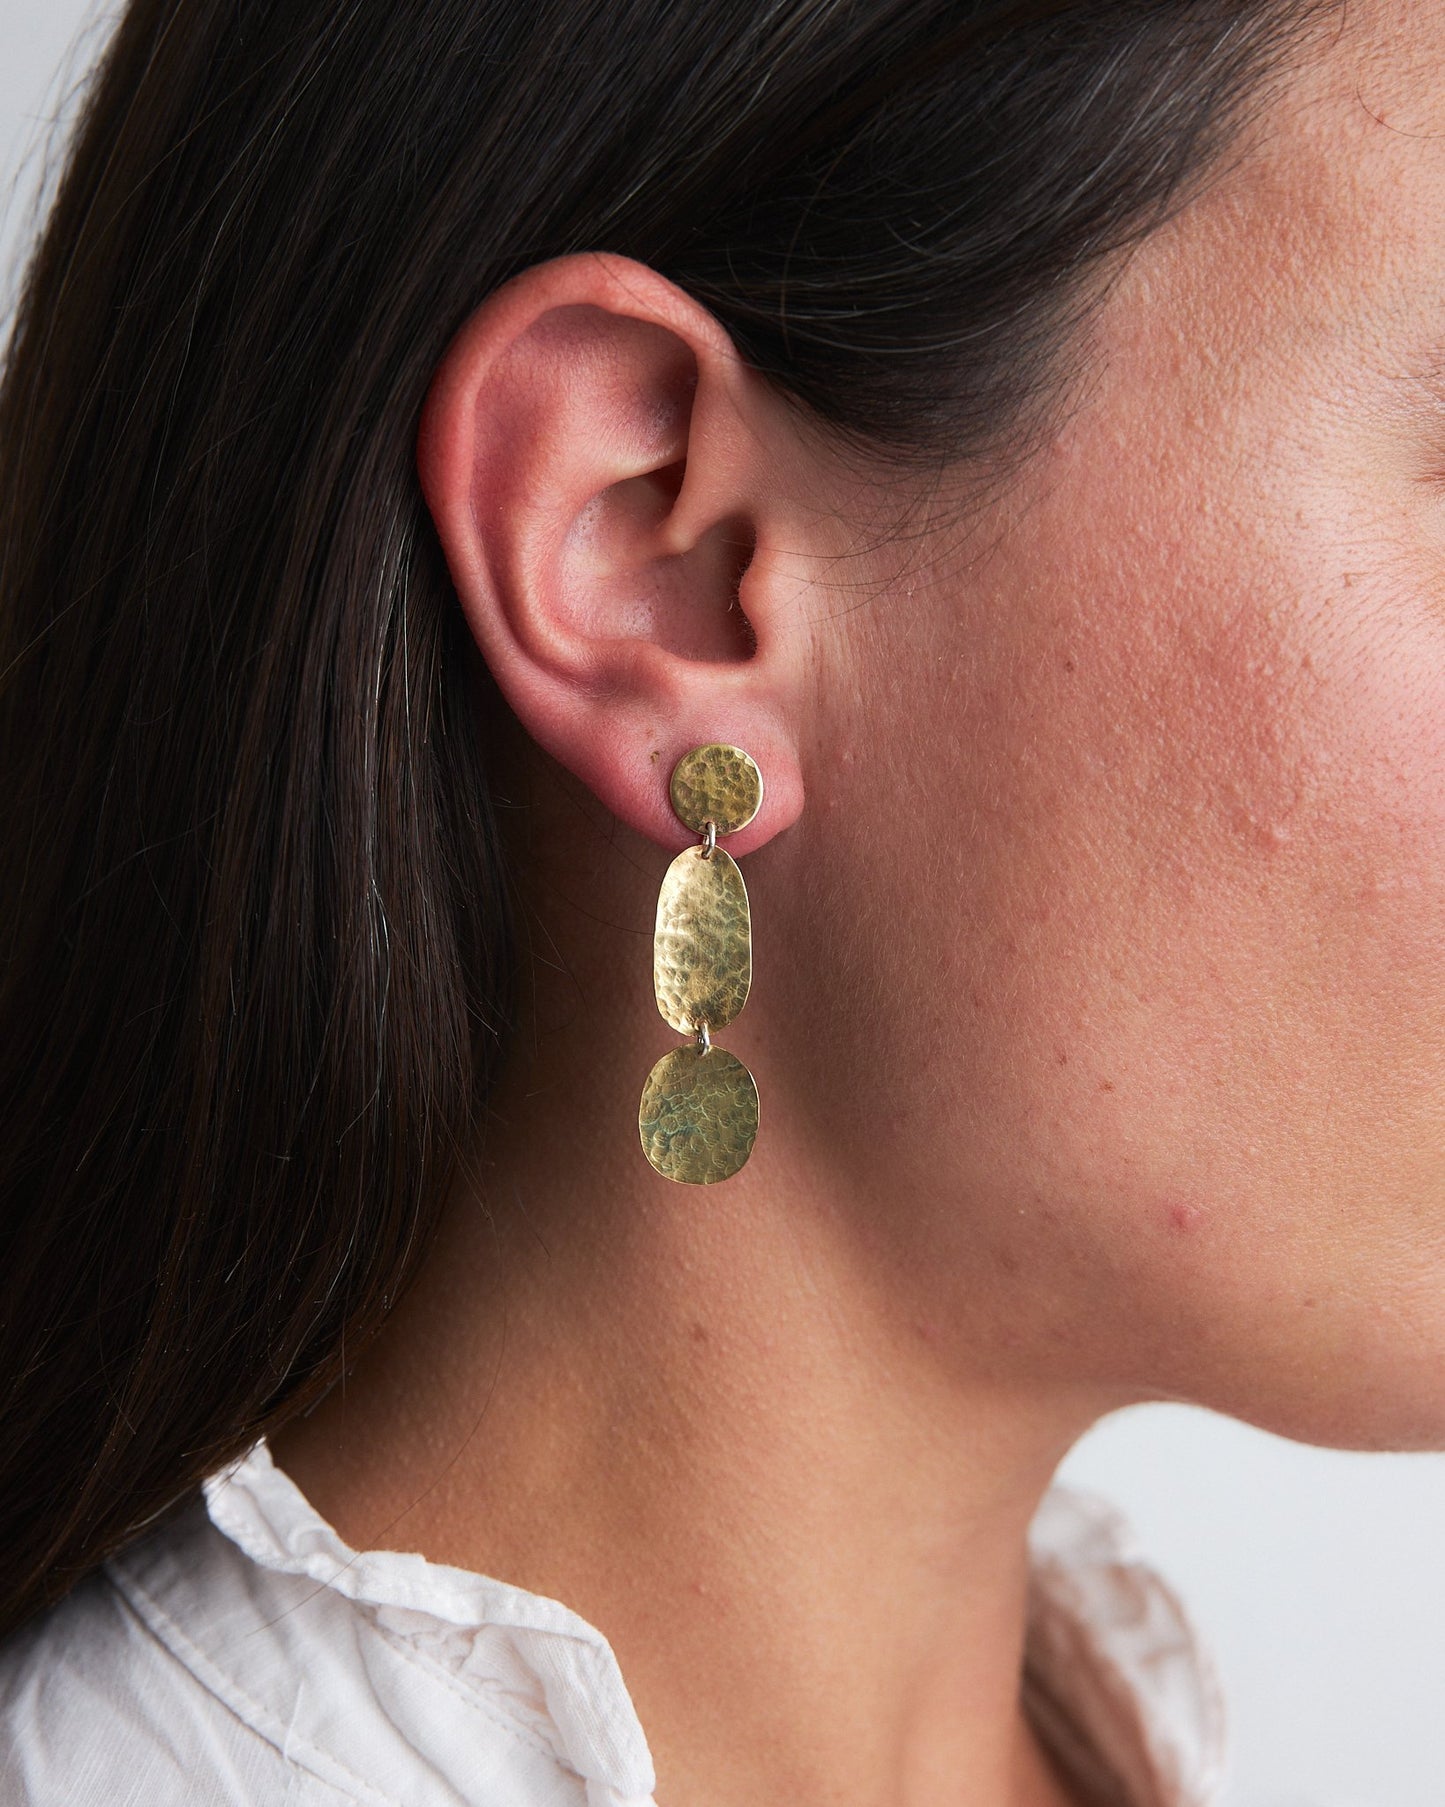  Sea Pebble Earrings: handmade in recycled brass these earrings have three pebble shapes articulated to move as you do. Worn by a model.